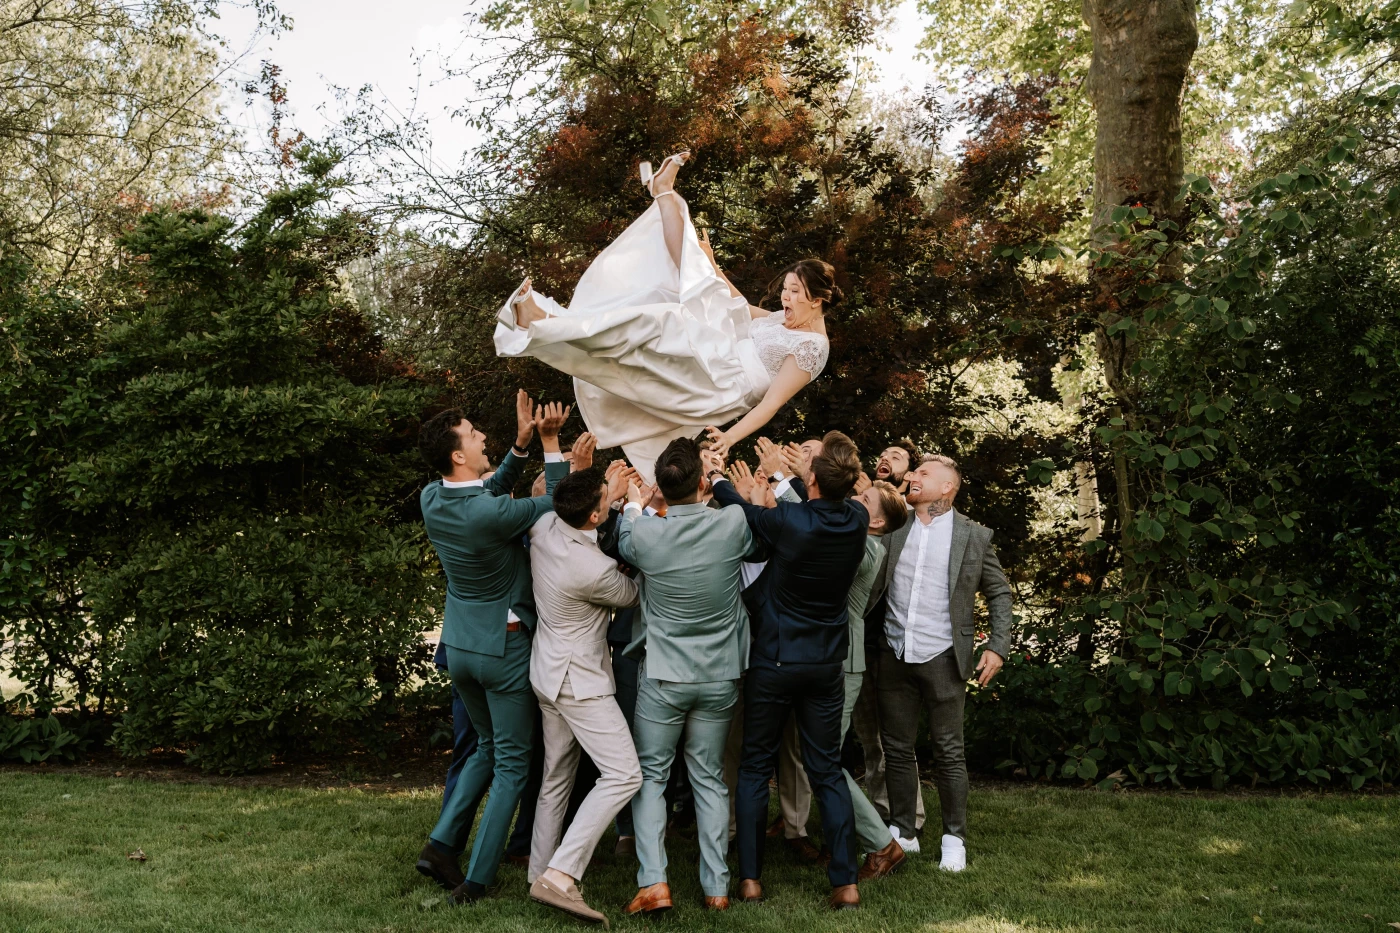 I asked some of the men to throw the bride in the air. We both did not expect she would be thrown th...